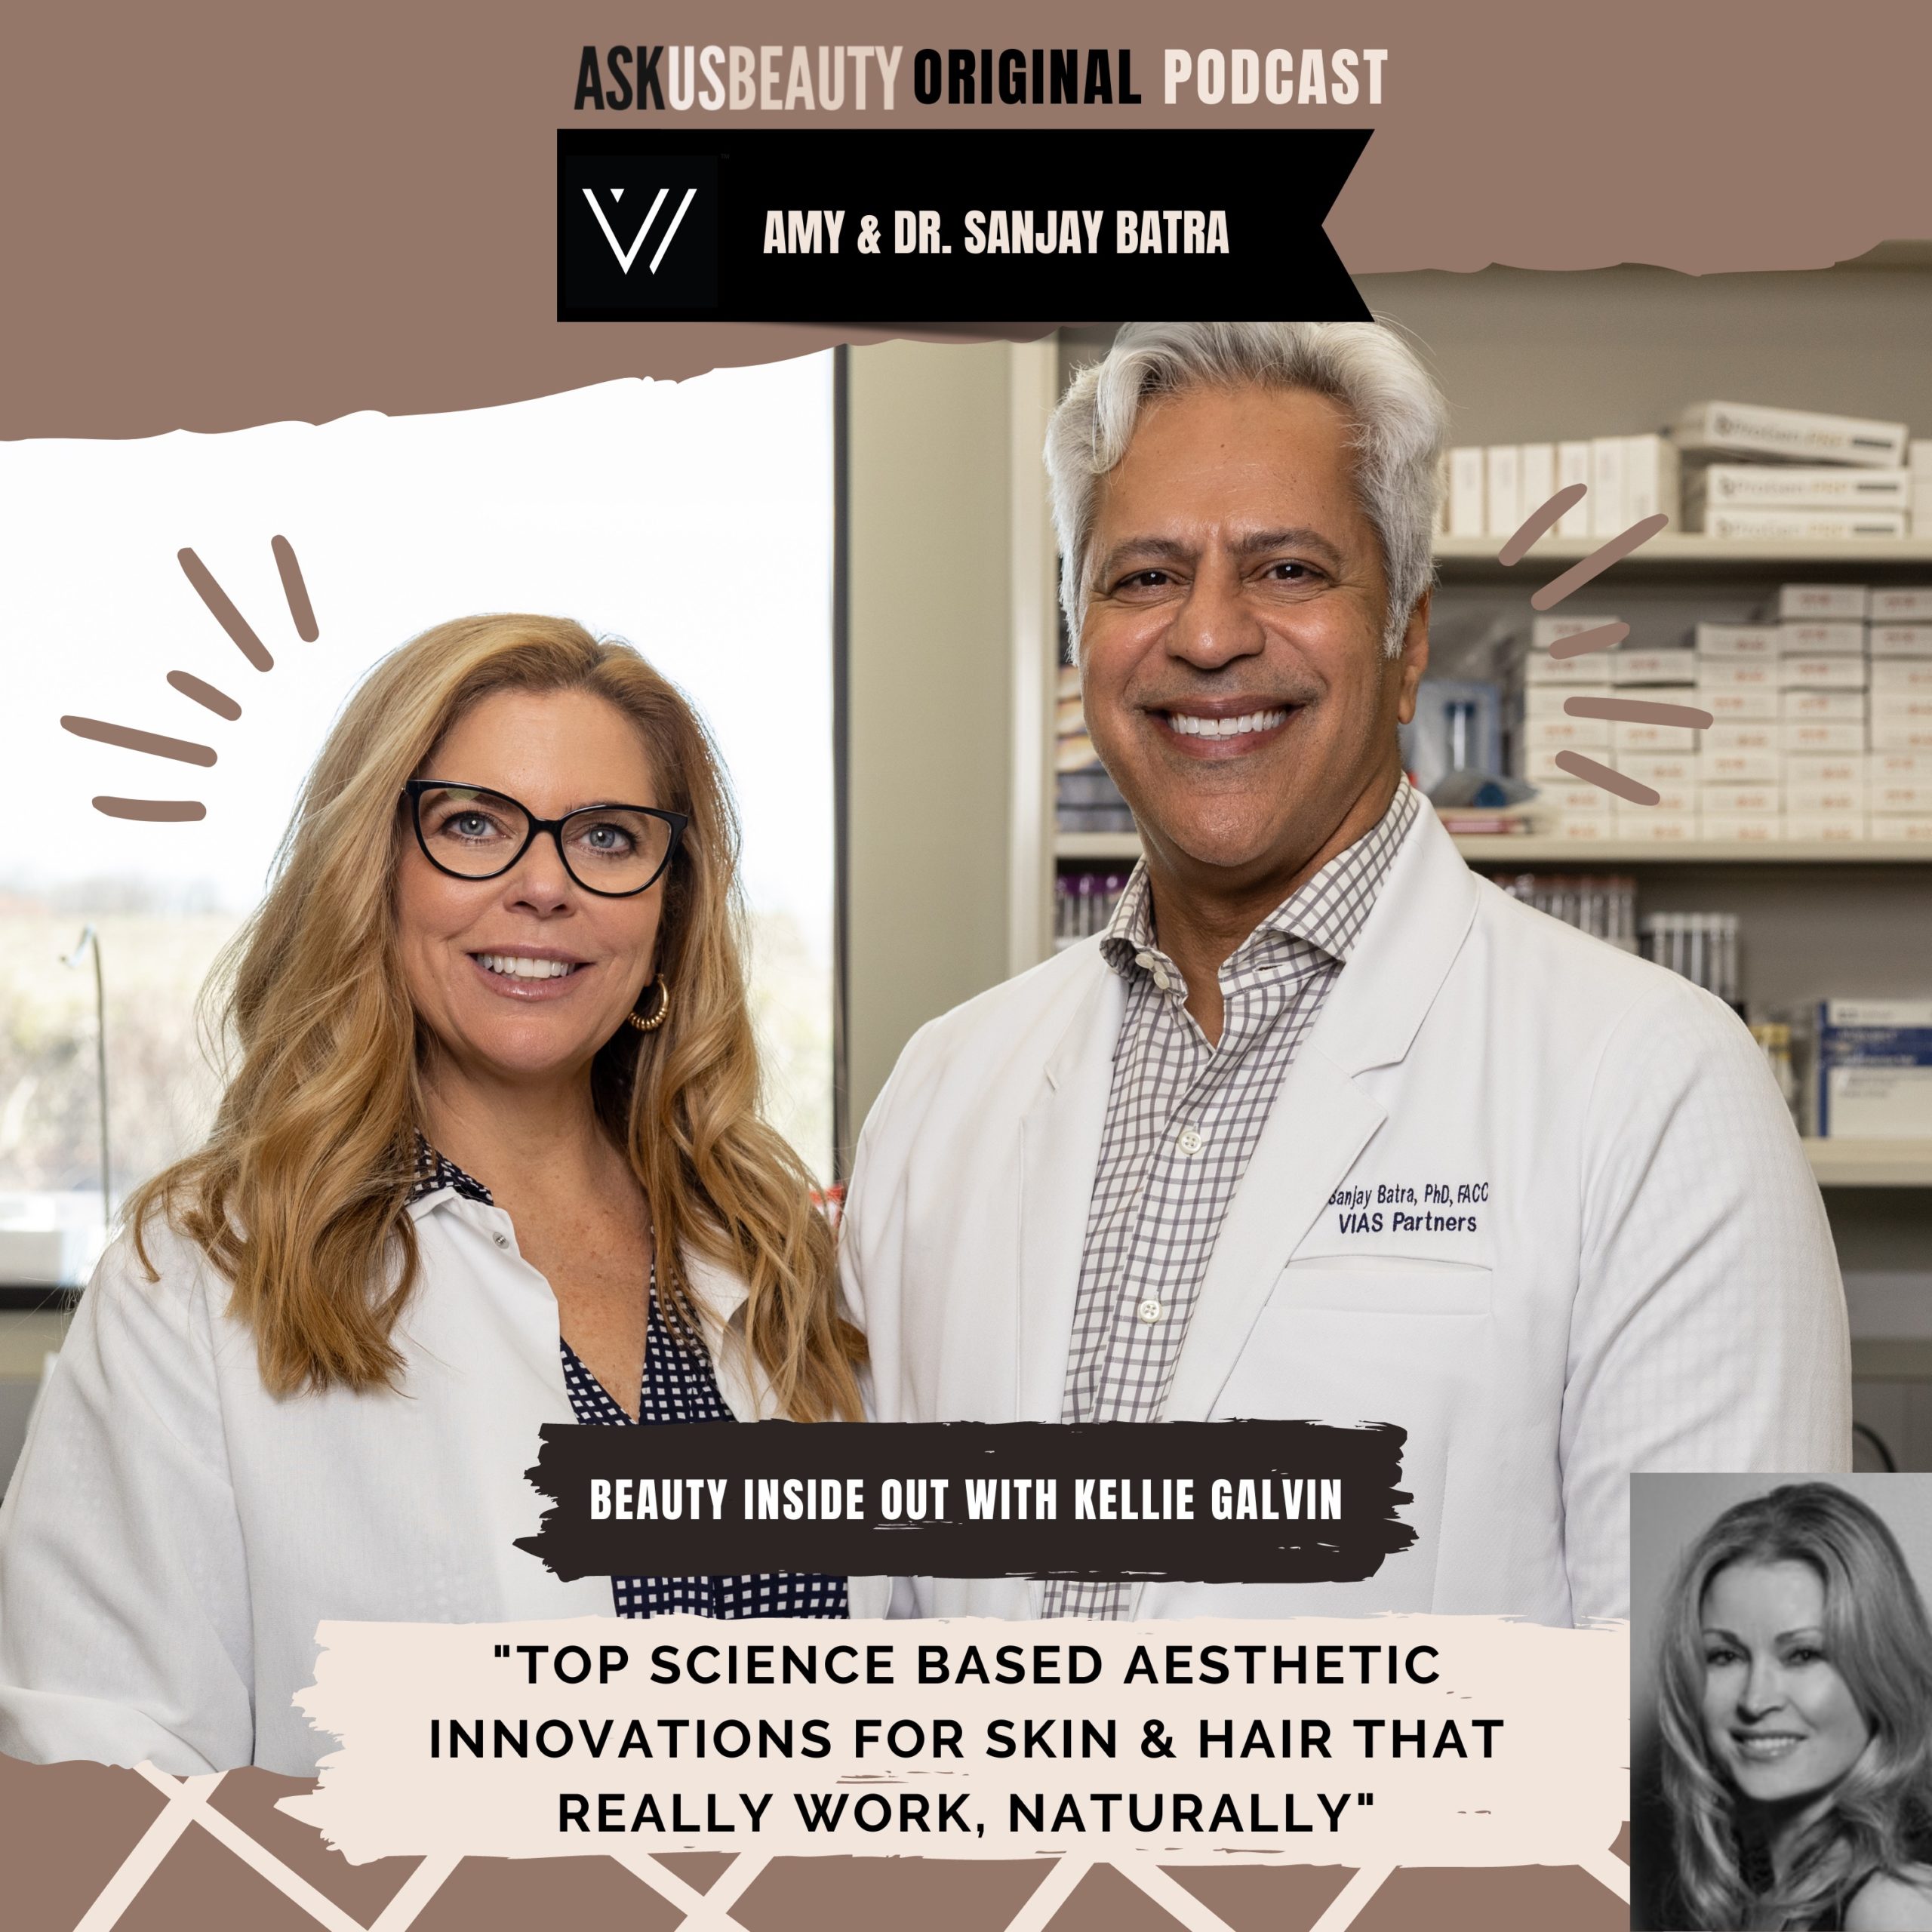 NEW Podcast live with our very own Co-Founder's Amy & Dr. Sanjay Batra.